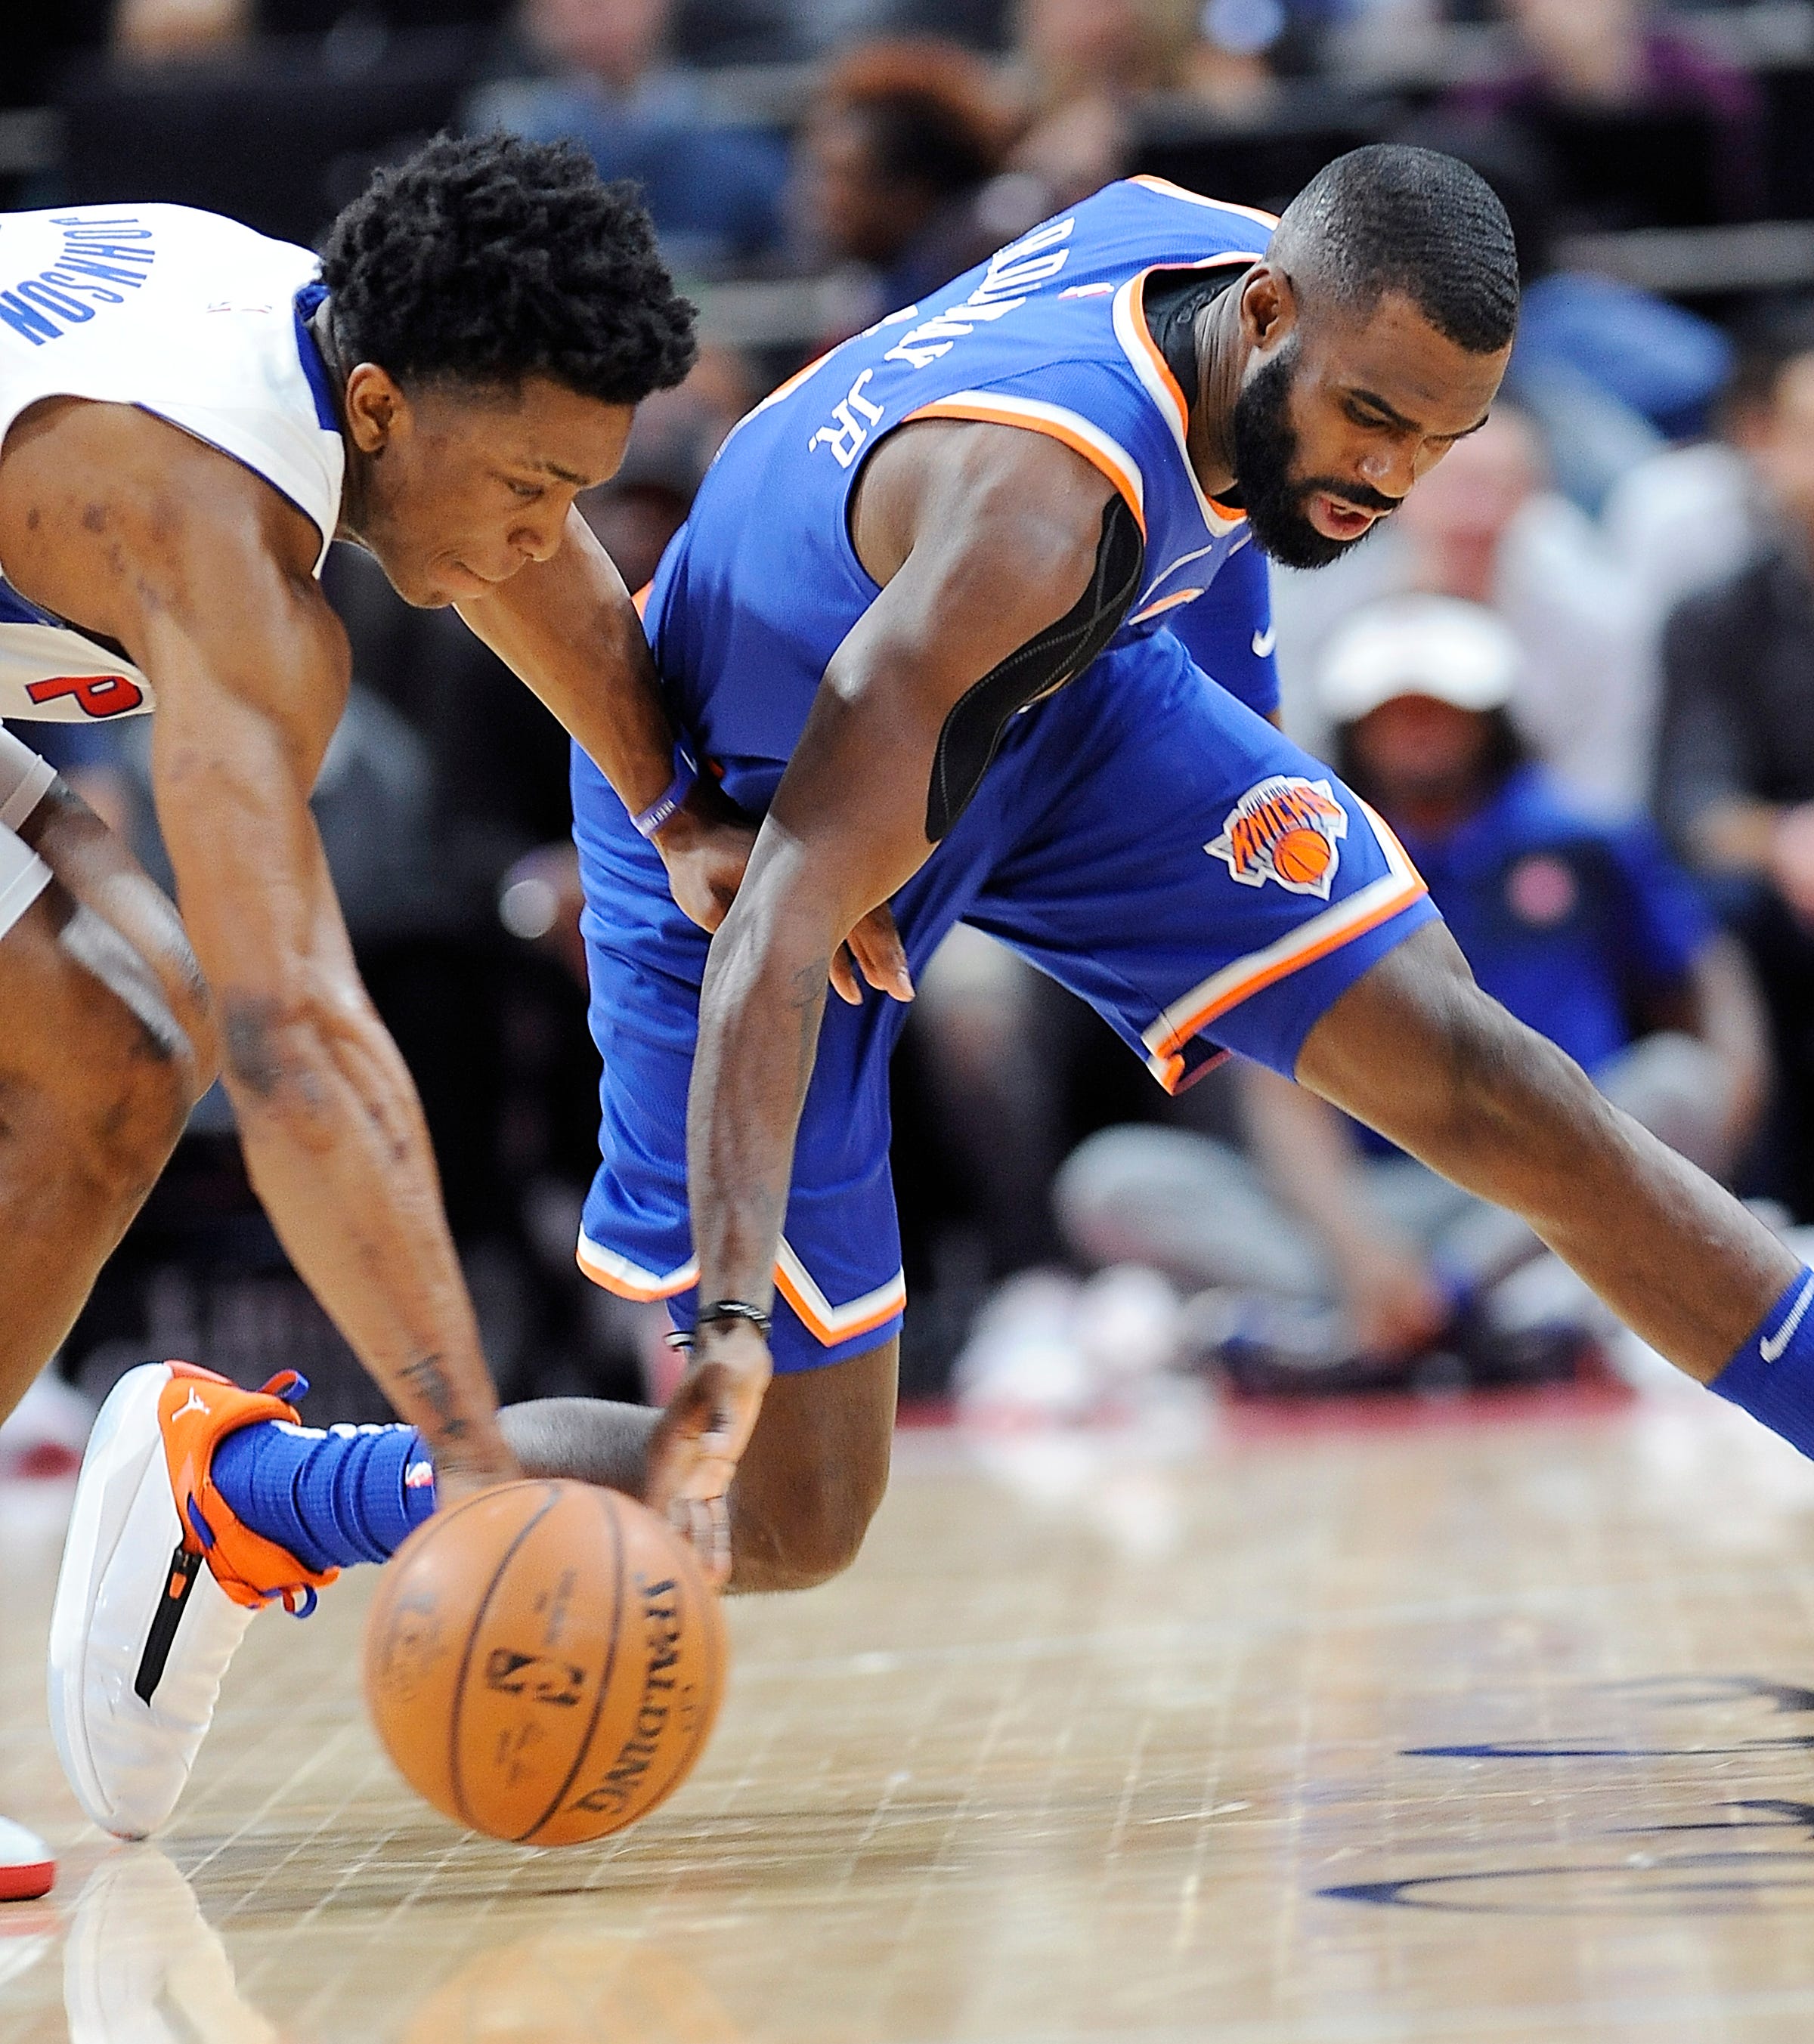 Pistons' Stanley Johnson, steals the ball from Knicks' Tim Hardaway Jr. in the second quarter.